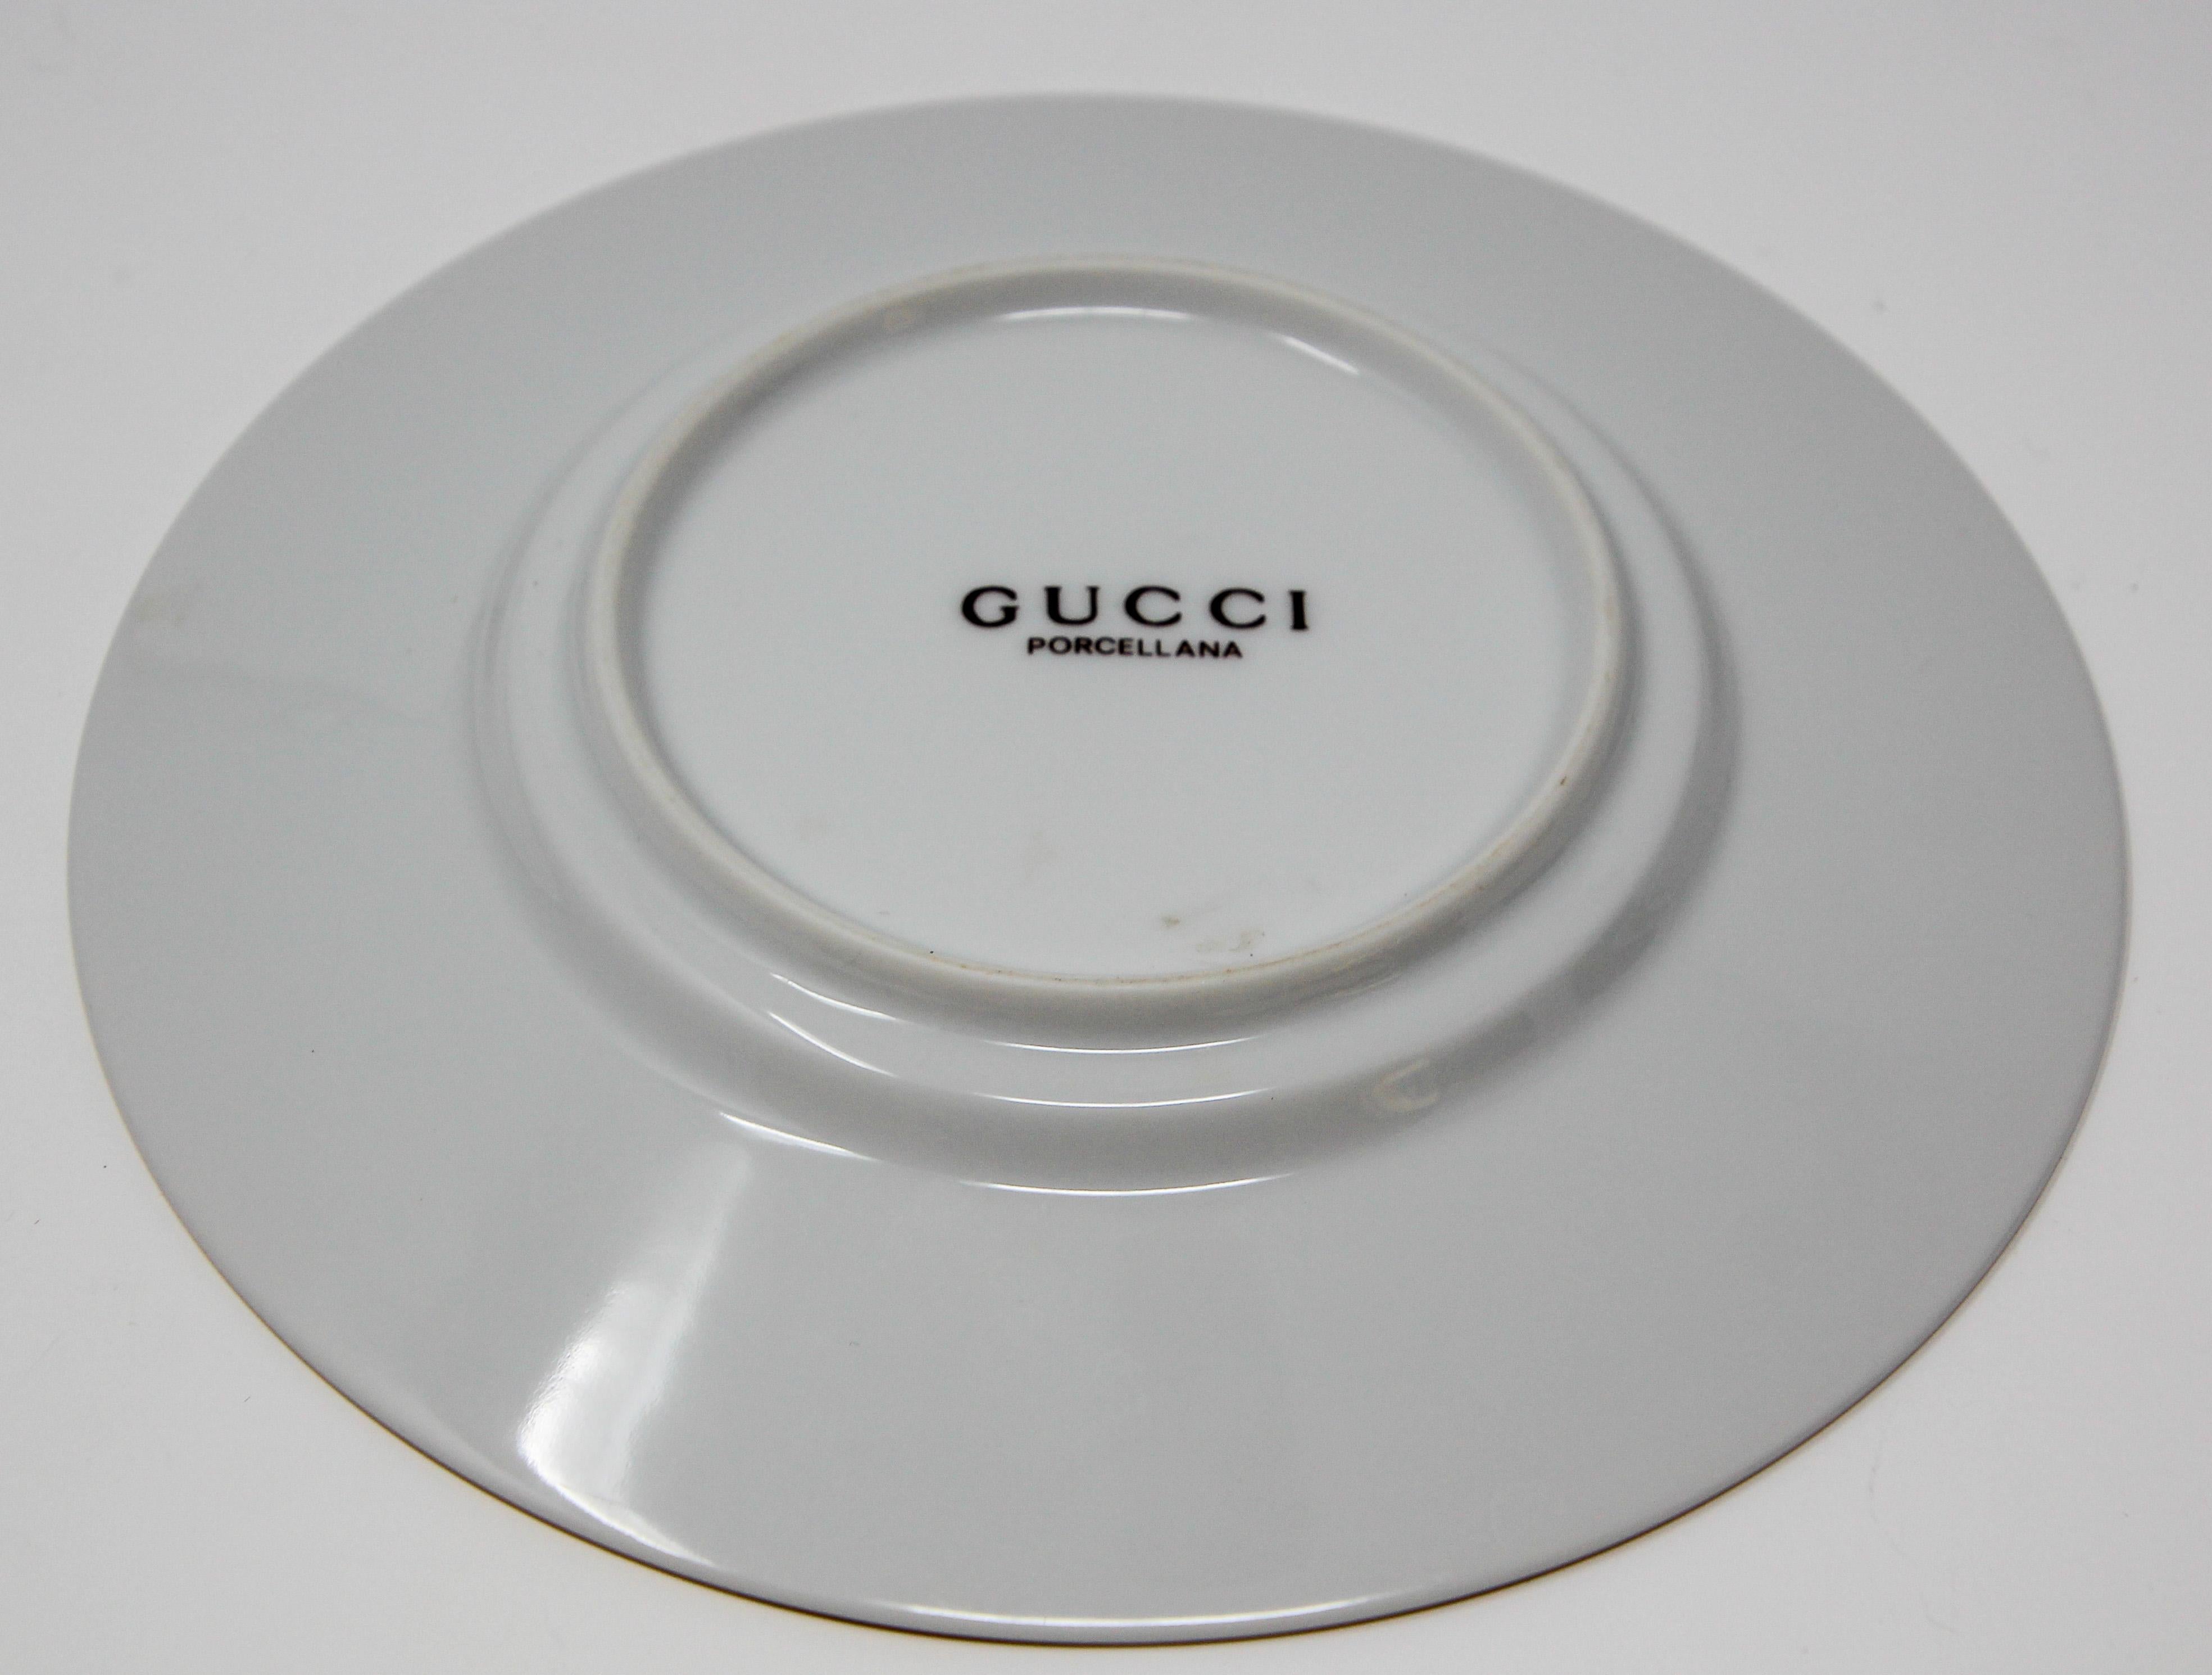 20th Century Gucci Porcelain Tea Cups and Saucers Set of 2